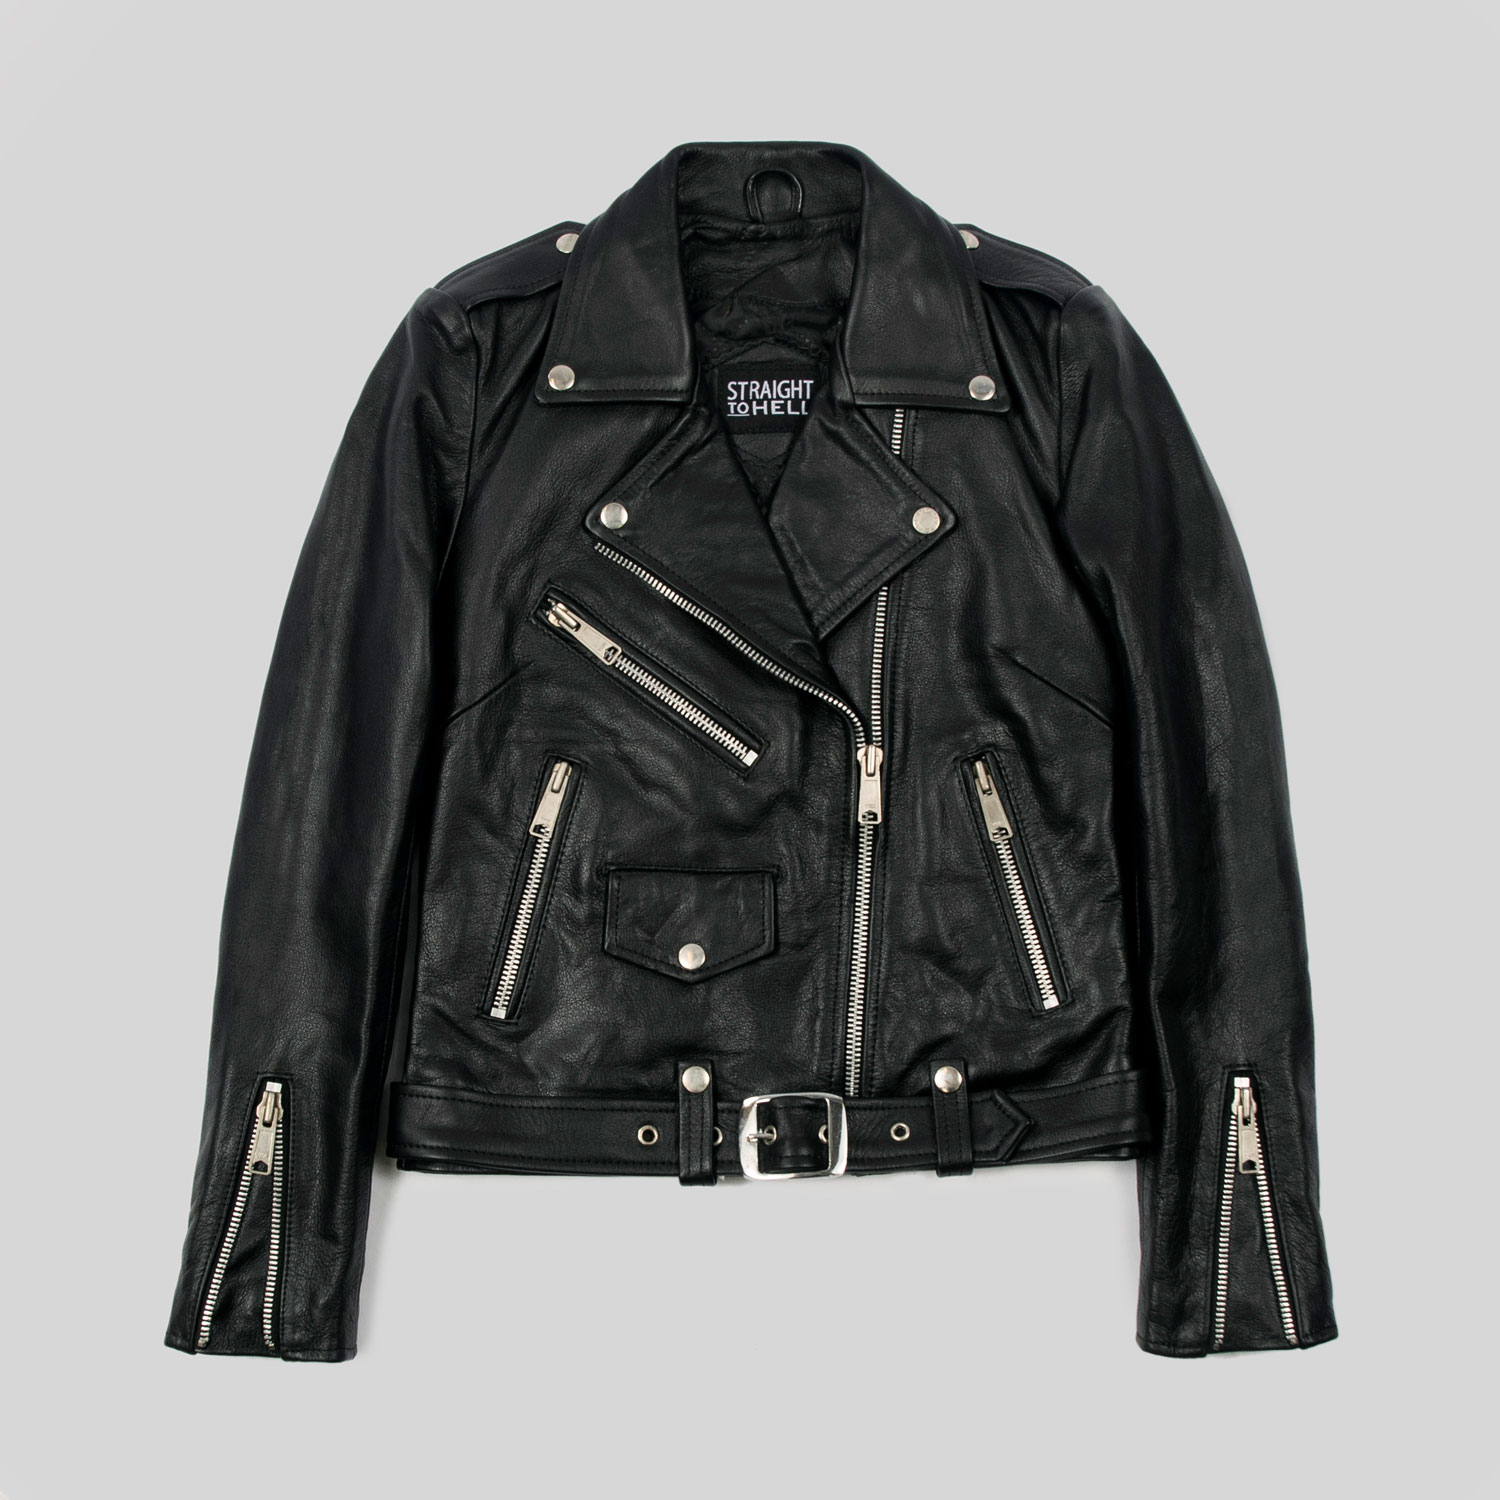 Commando - Black and To Lining Black - Jacket Straight Nickel Leather Apparel - Hell 